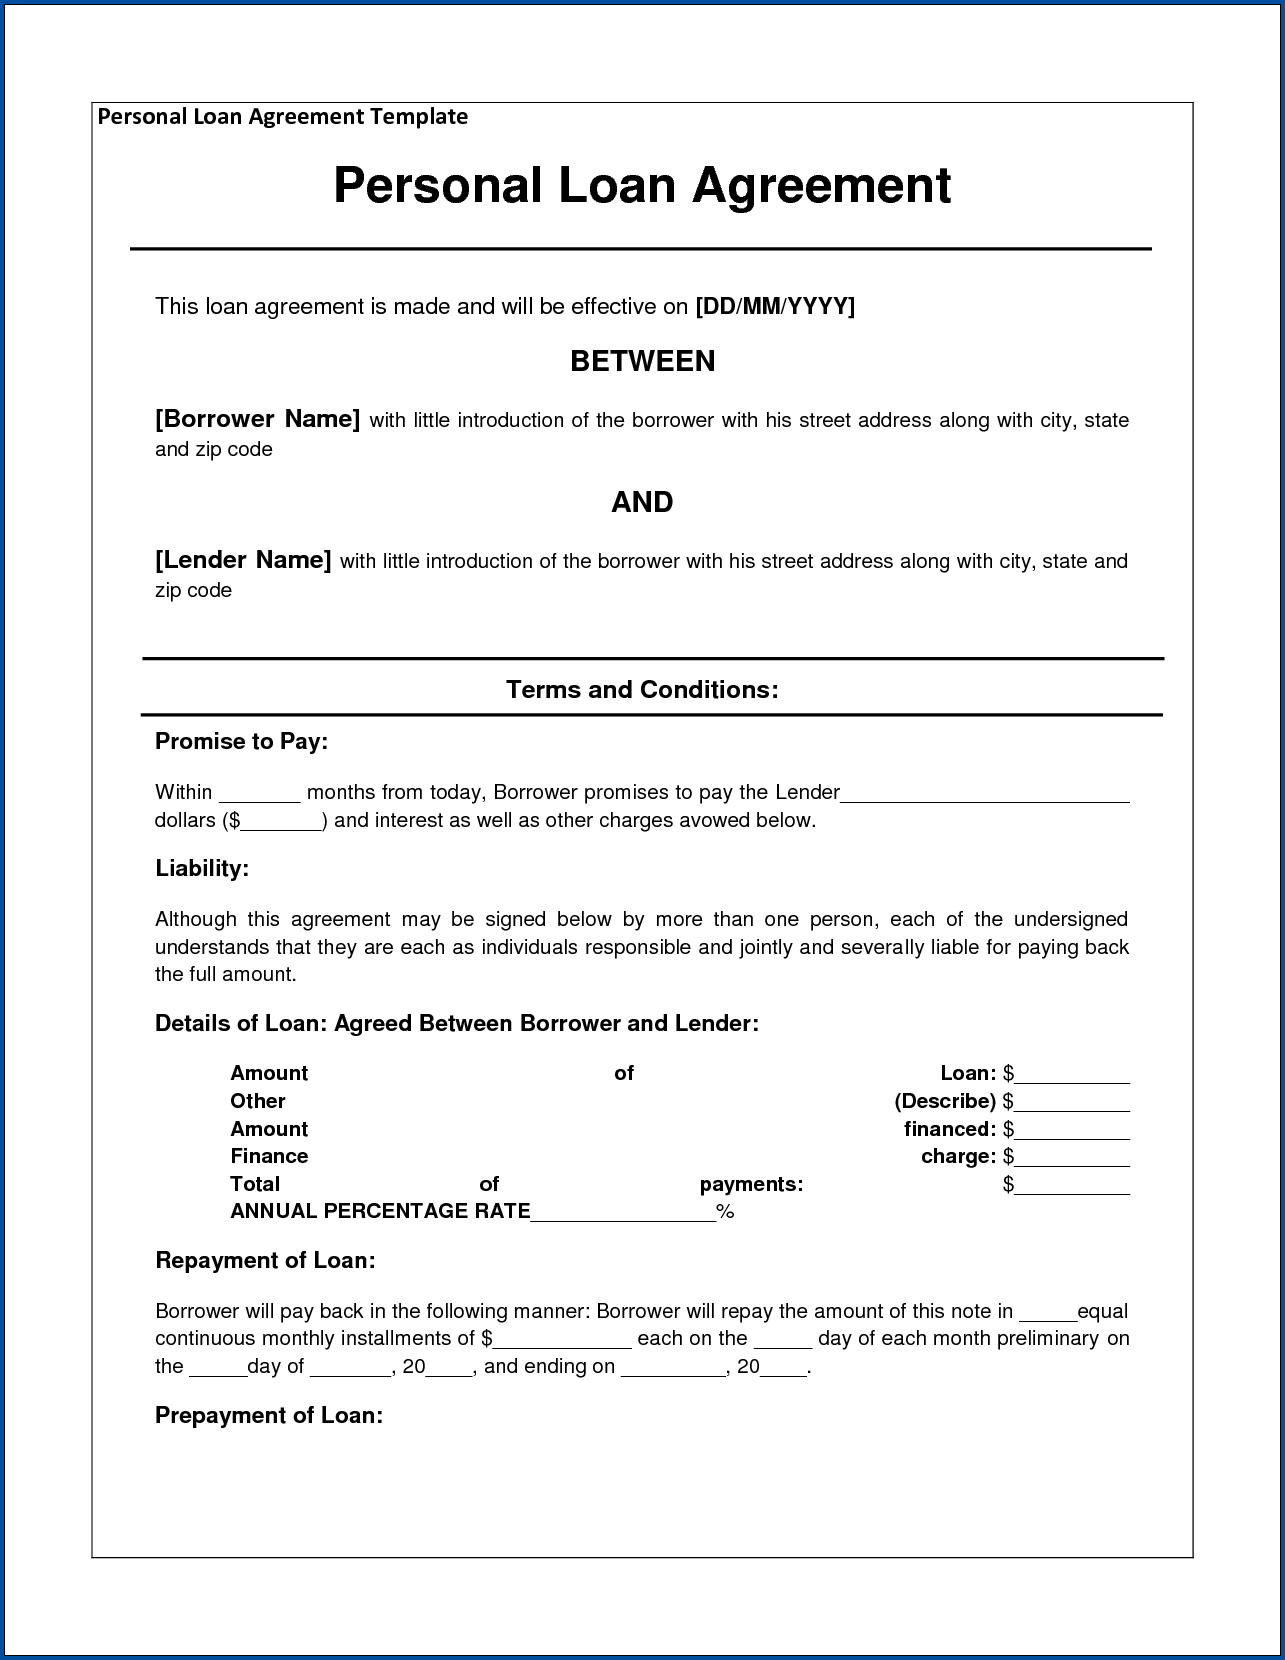 Sample of Loan Contract Agreement Template